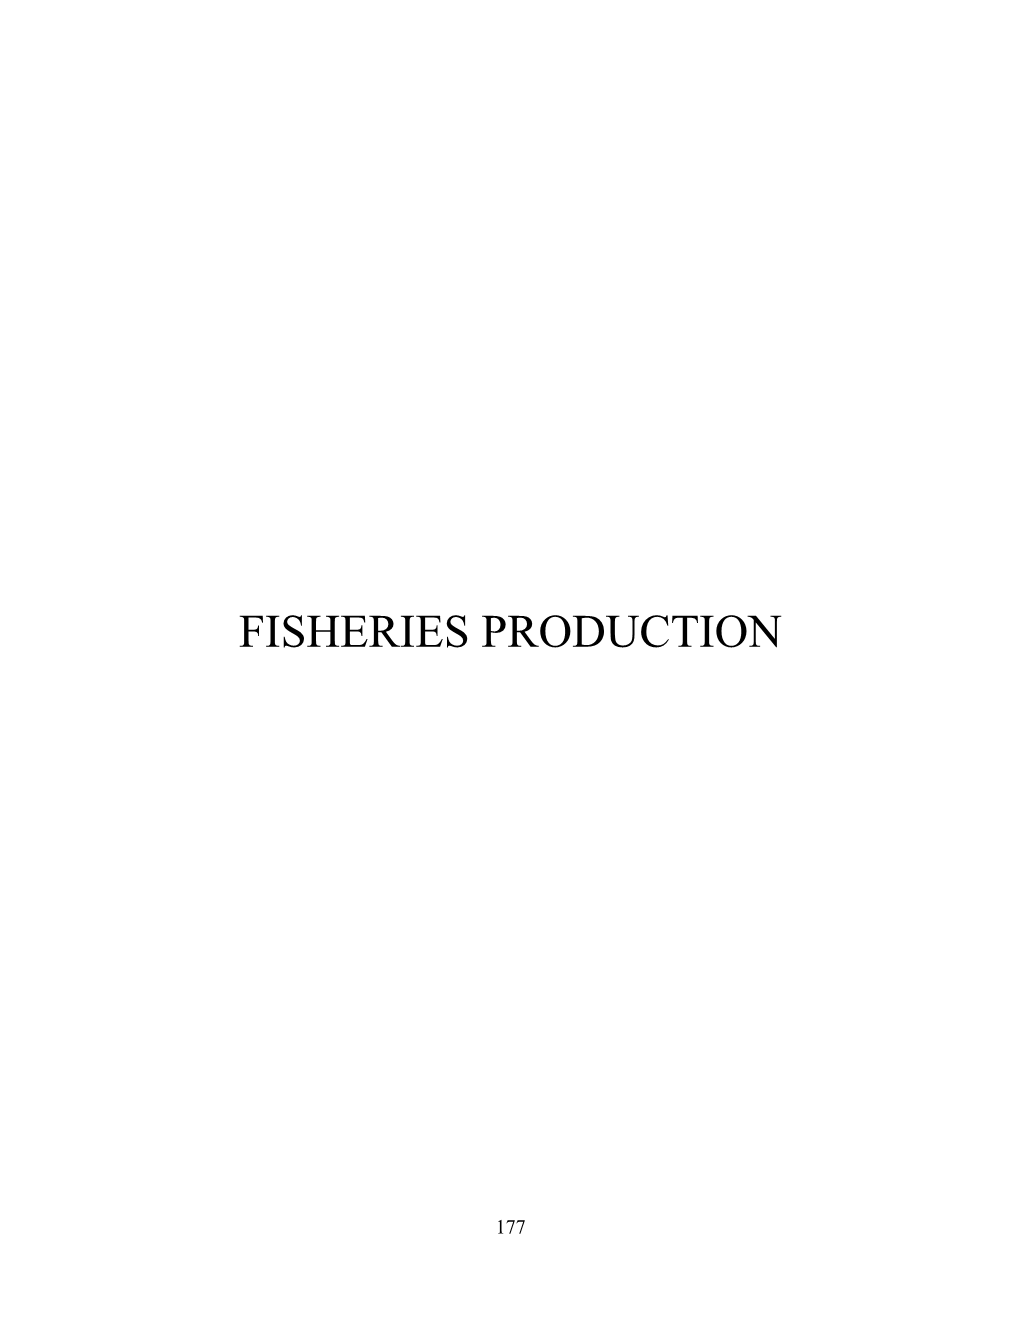 Fisheries Production